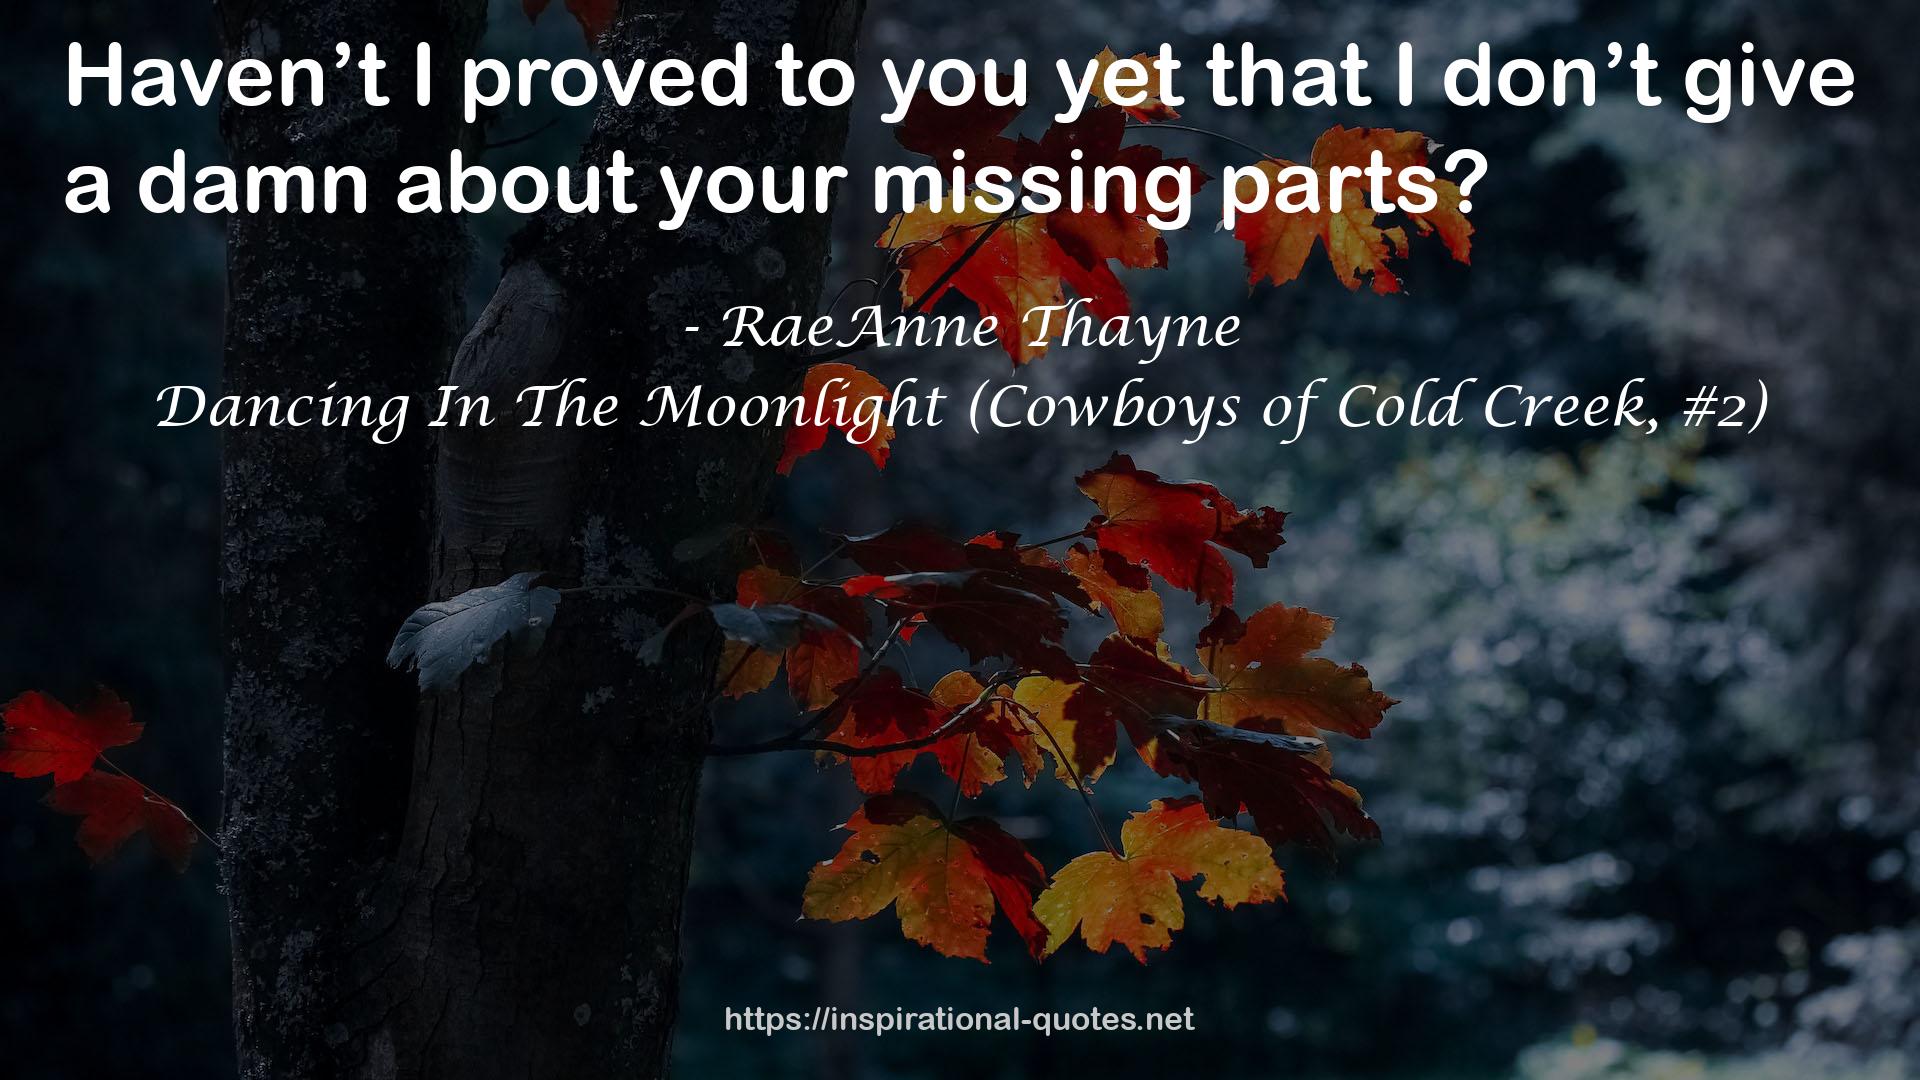 Dancing In The Moonlight (Cowboys of Cold Creek, #2) QUOTES